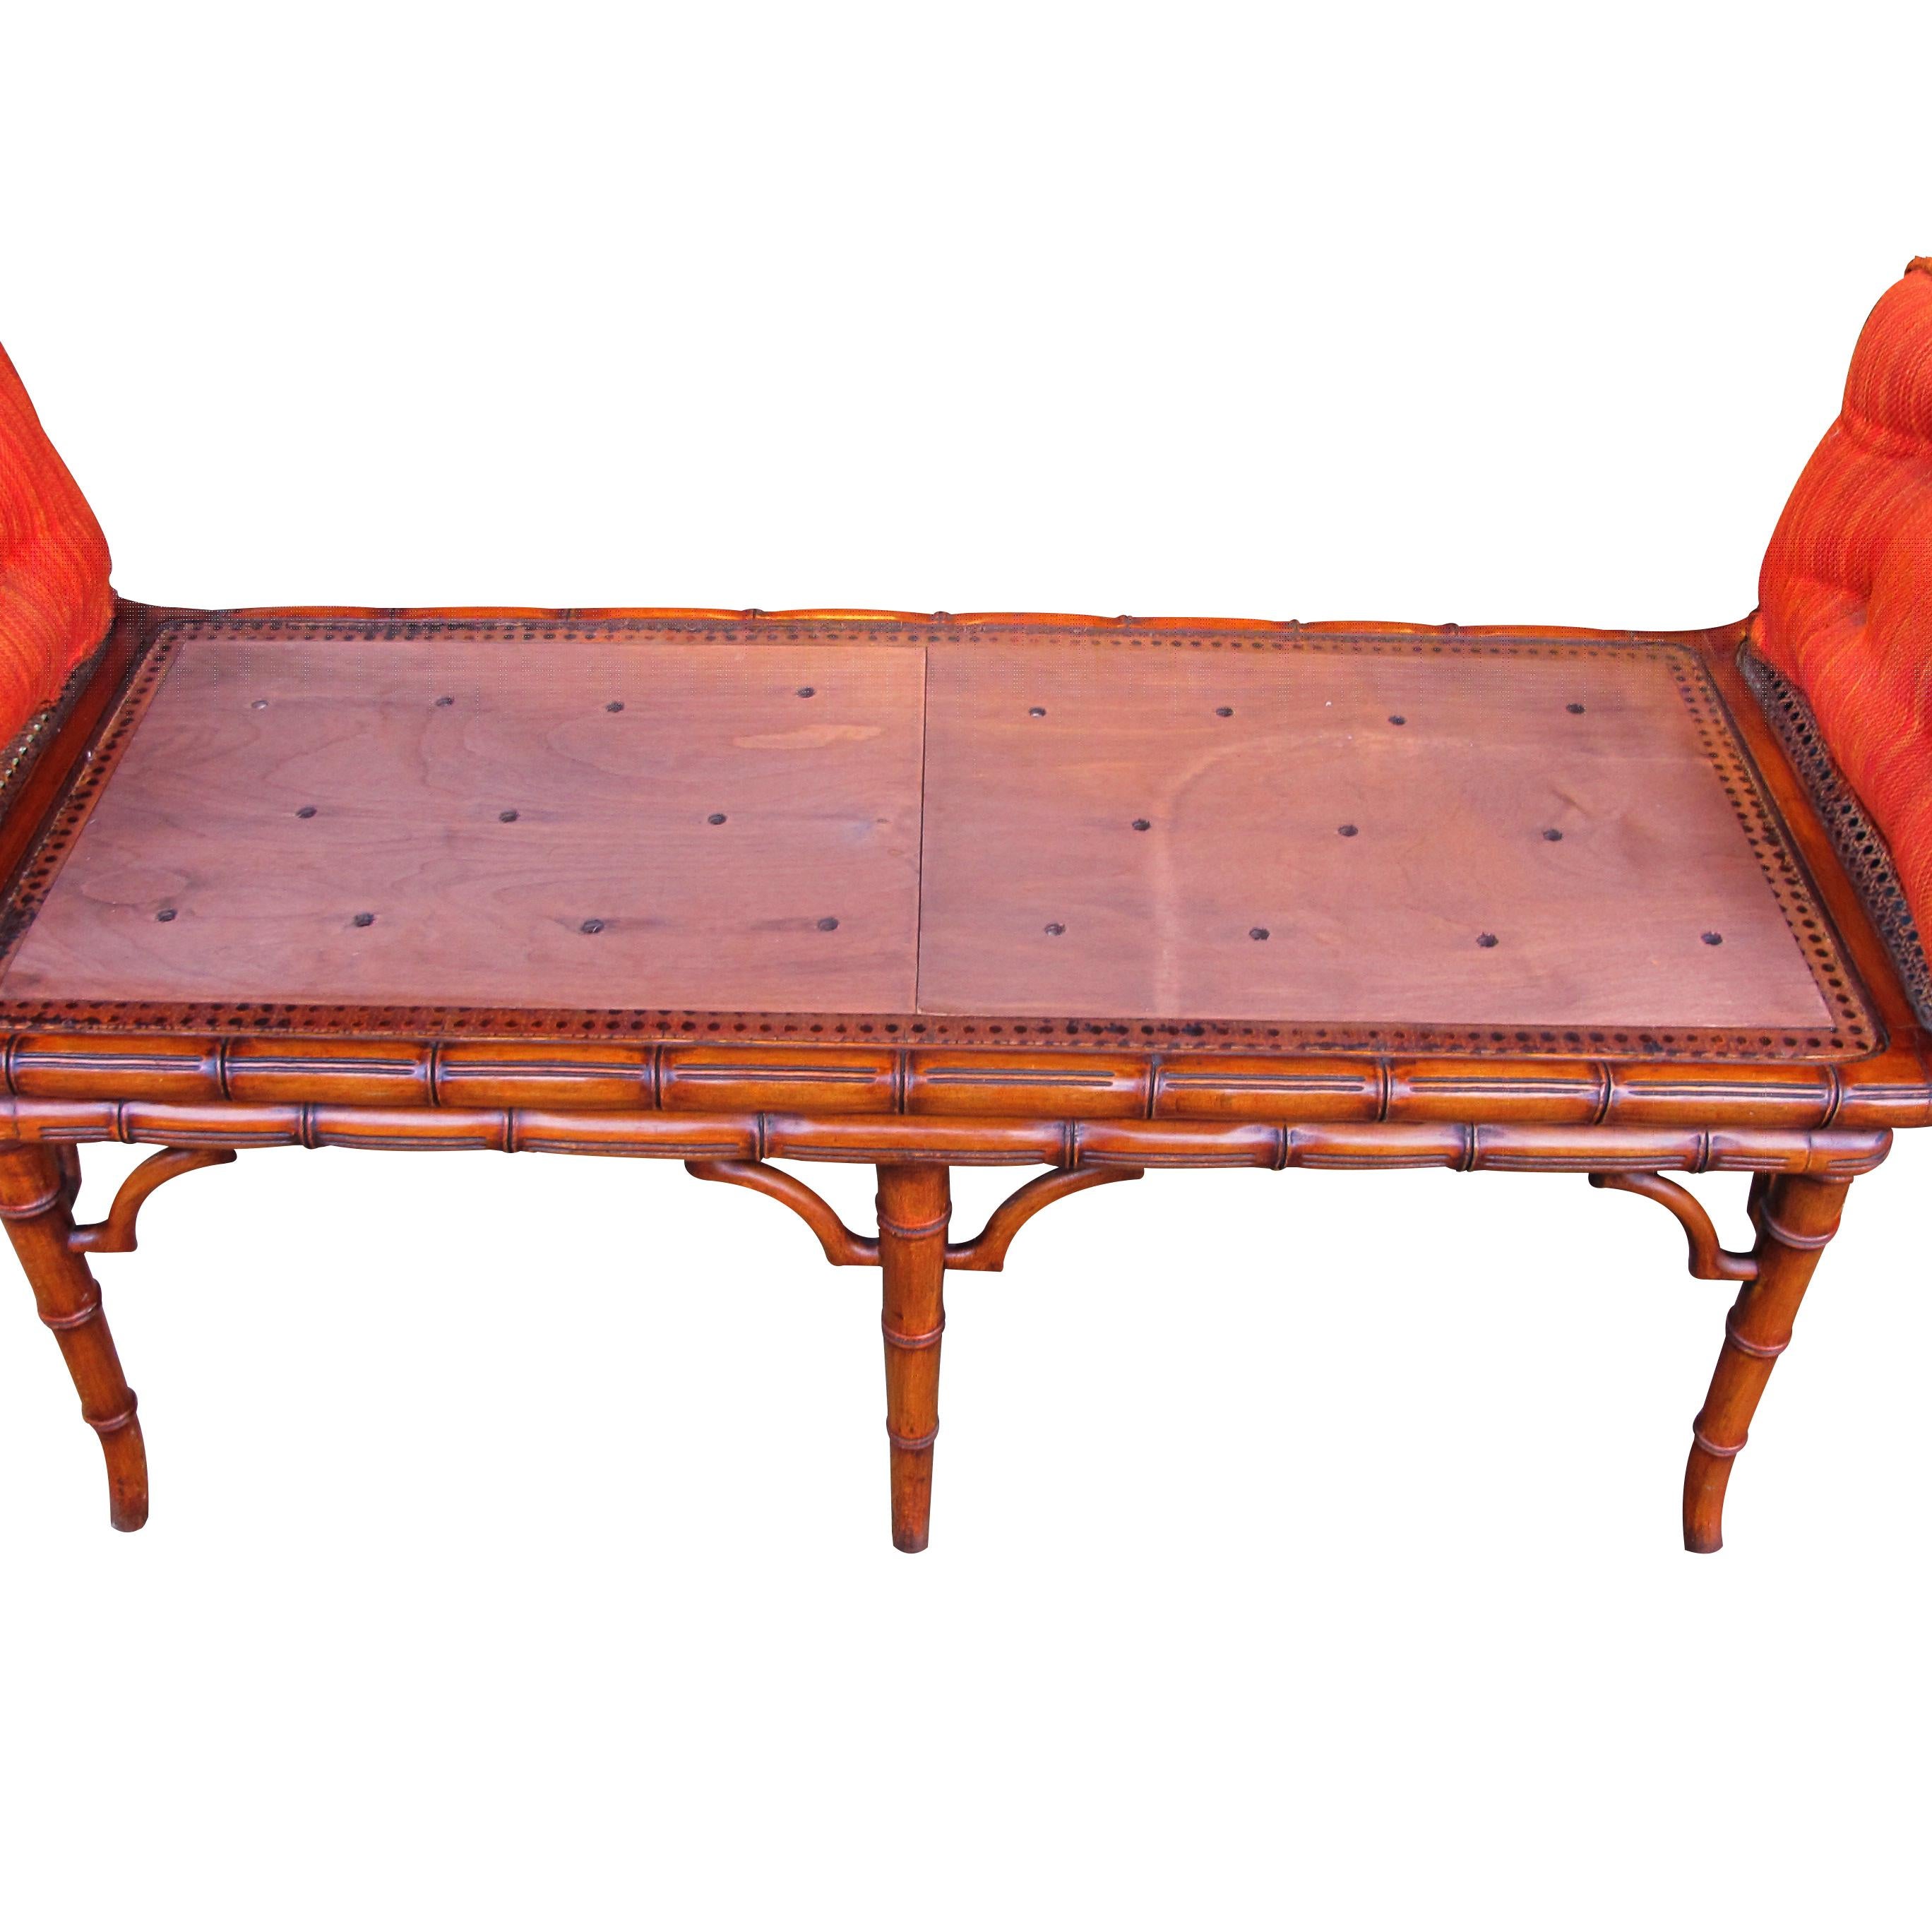 Fabric Italian 1940s Cane and Faux Bamboo Frame Bench with its Original Upholstery For Sale